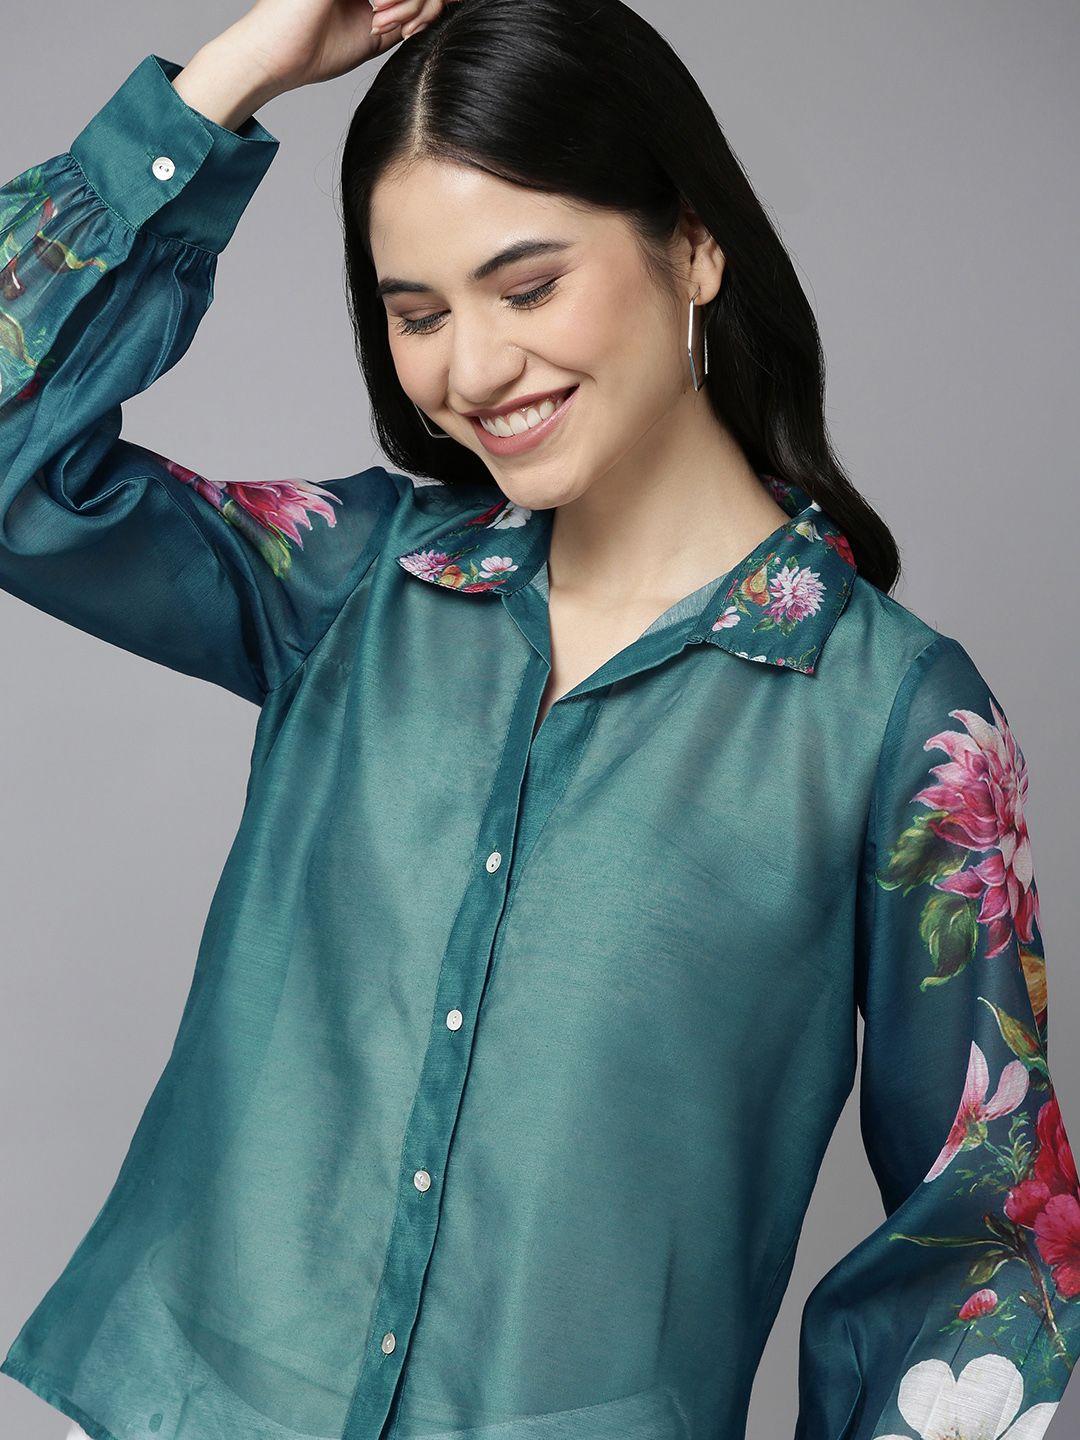 bhama couture women teal blue floral detail shirt style top